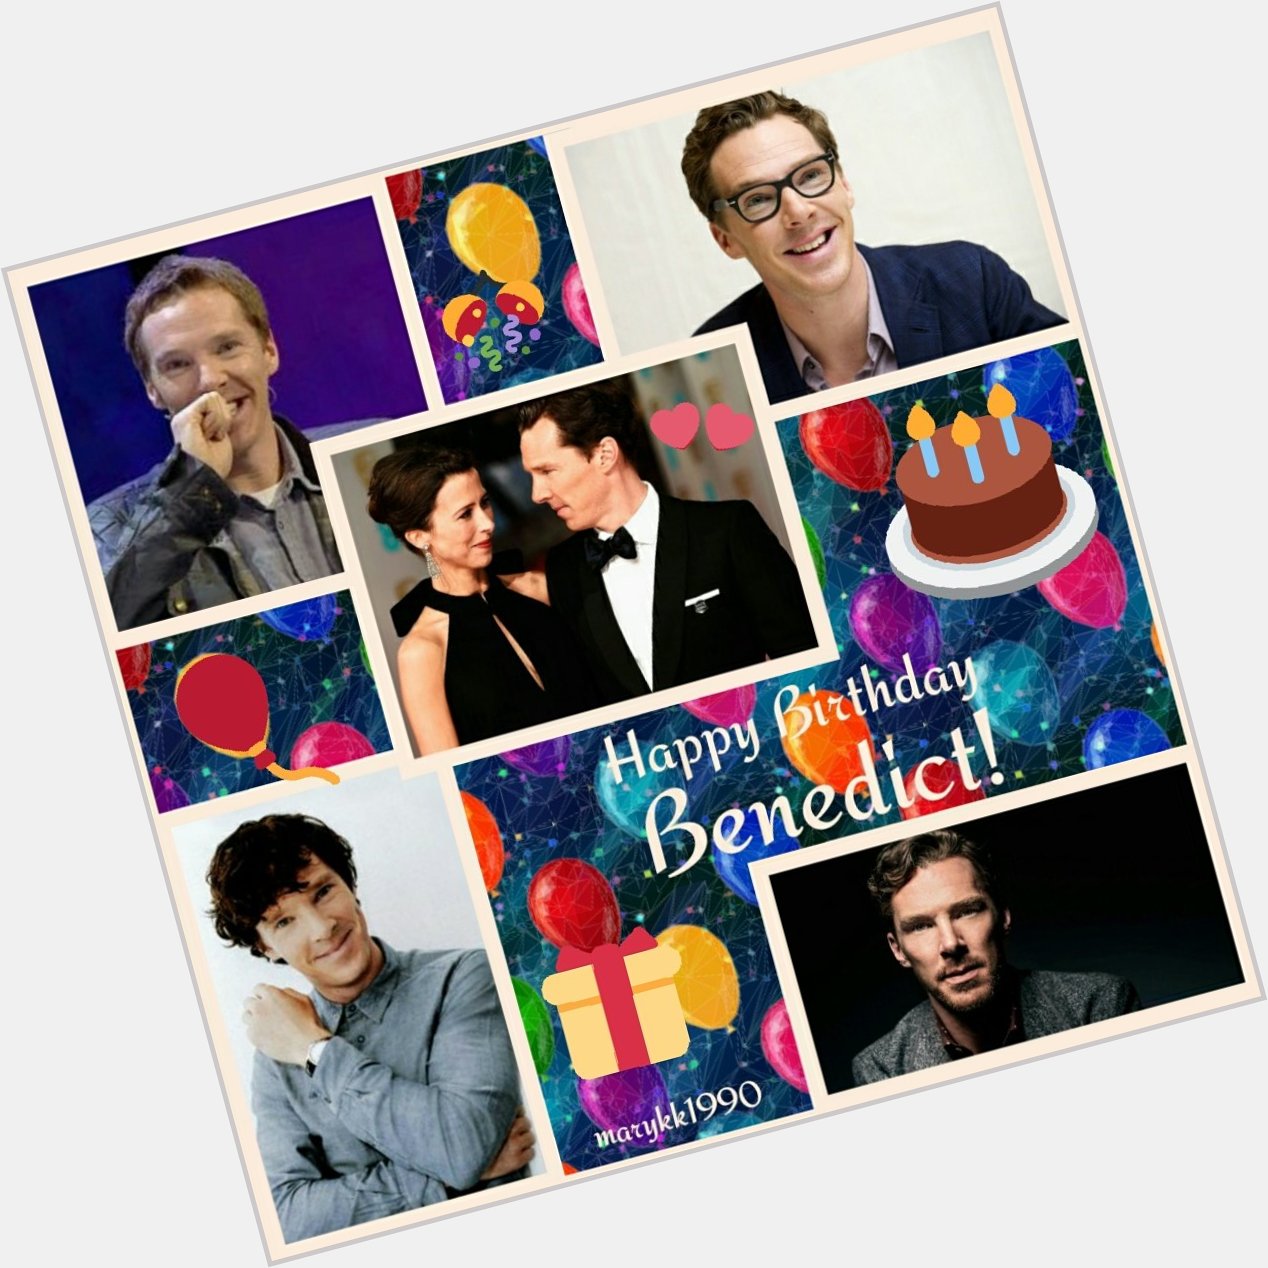 Wishing Benedict Cumberbatch a very happy birthday with his family.   Happy Birthday to you!   